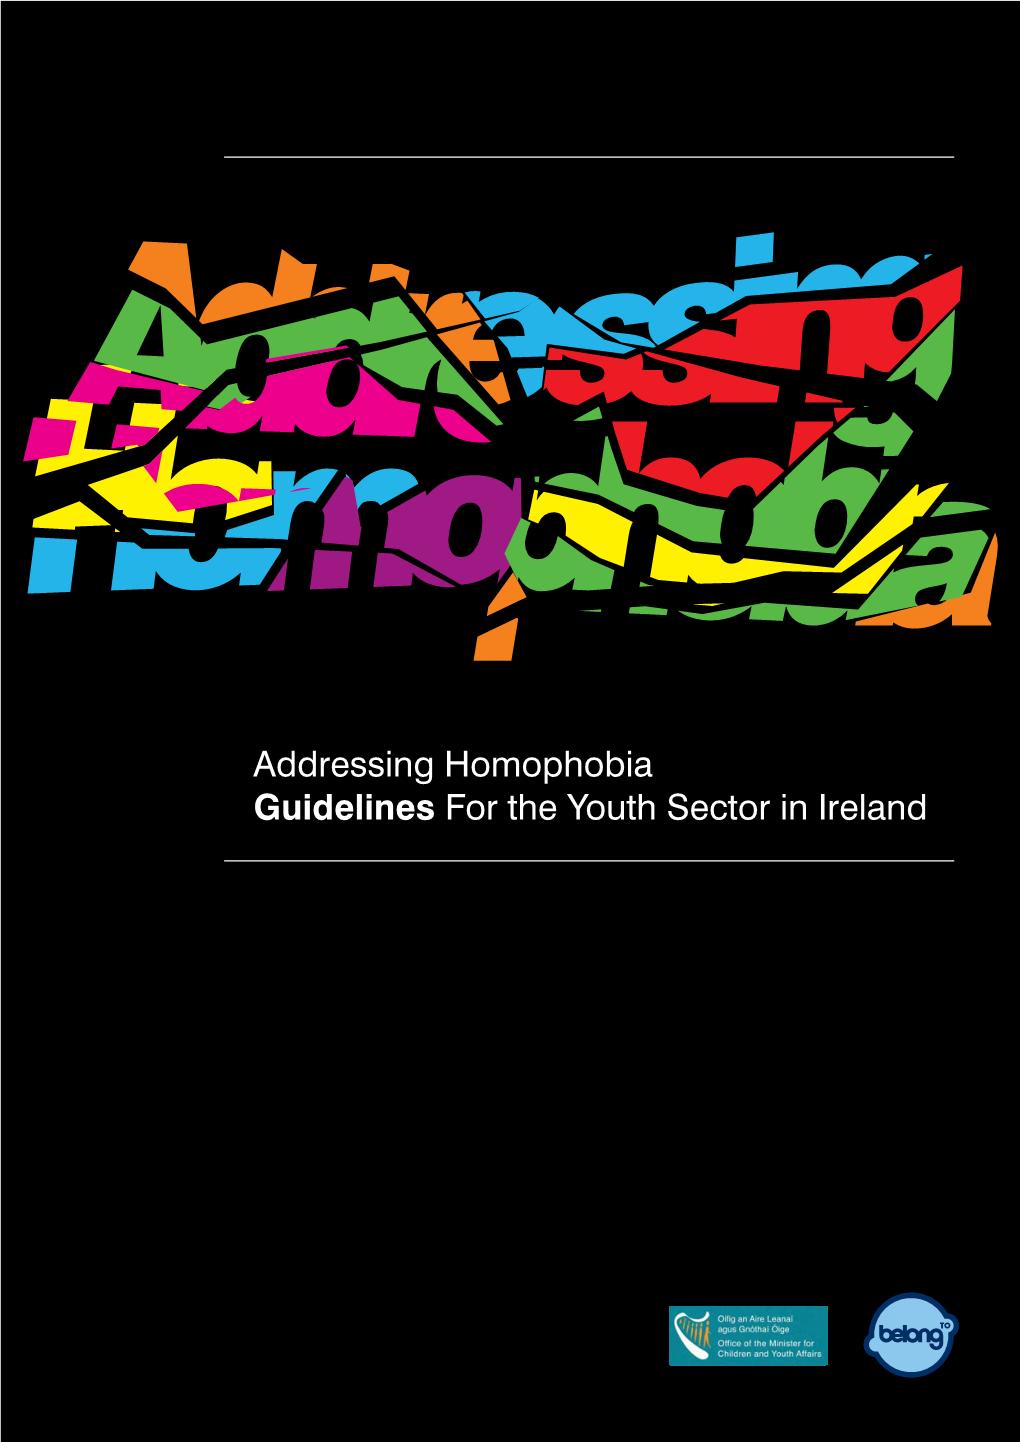 Addressing Homophobia Guidelines for the Youth Sector in Ireland Addressing Homophobia Guidelines for the Youth Sector in Ireland